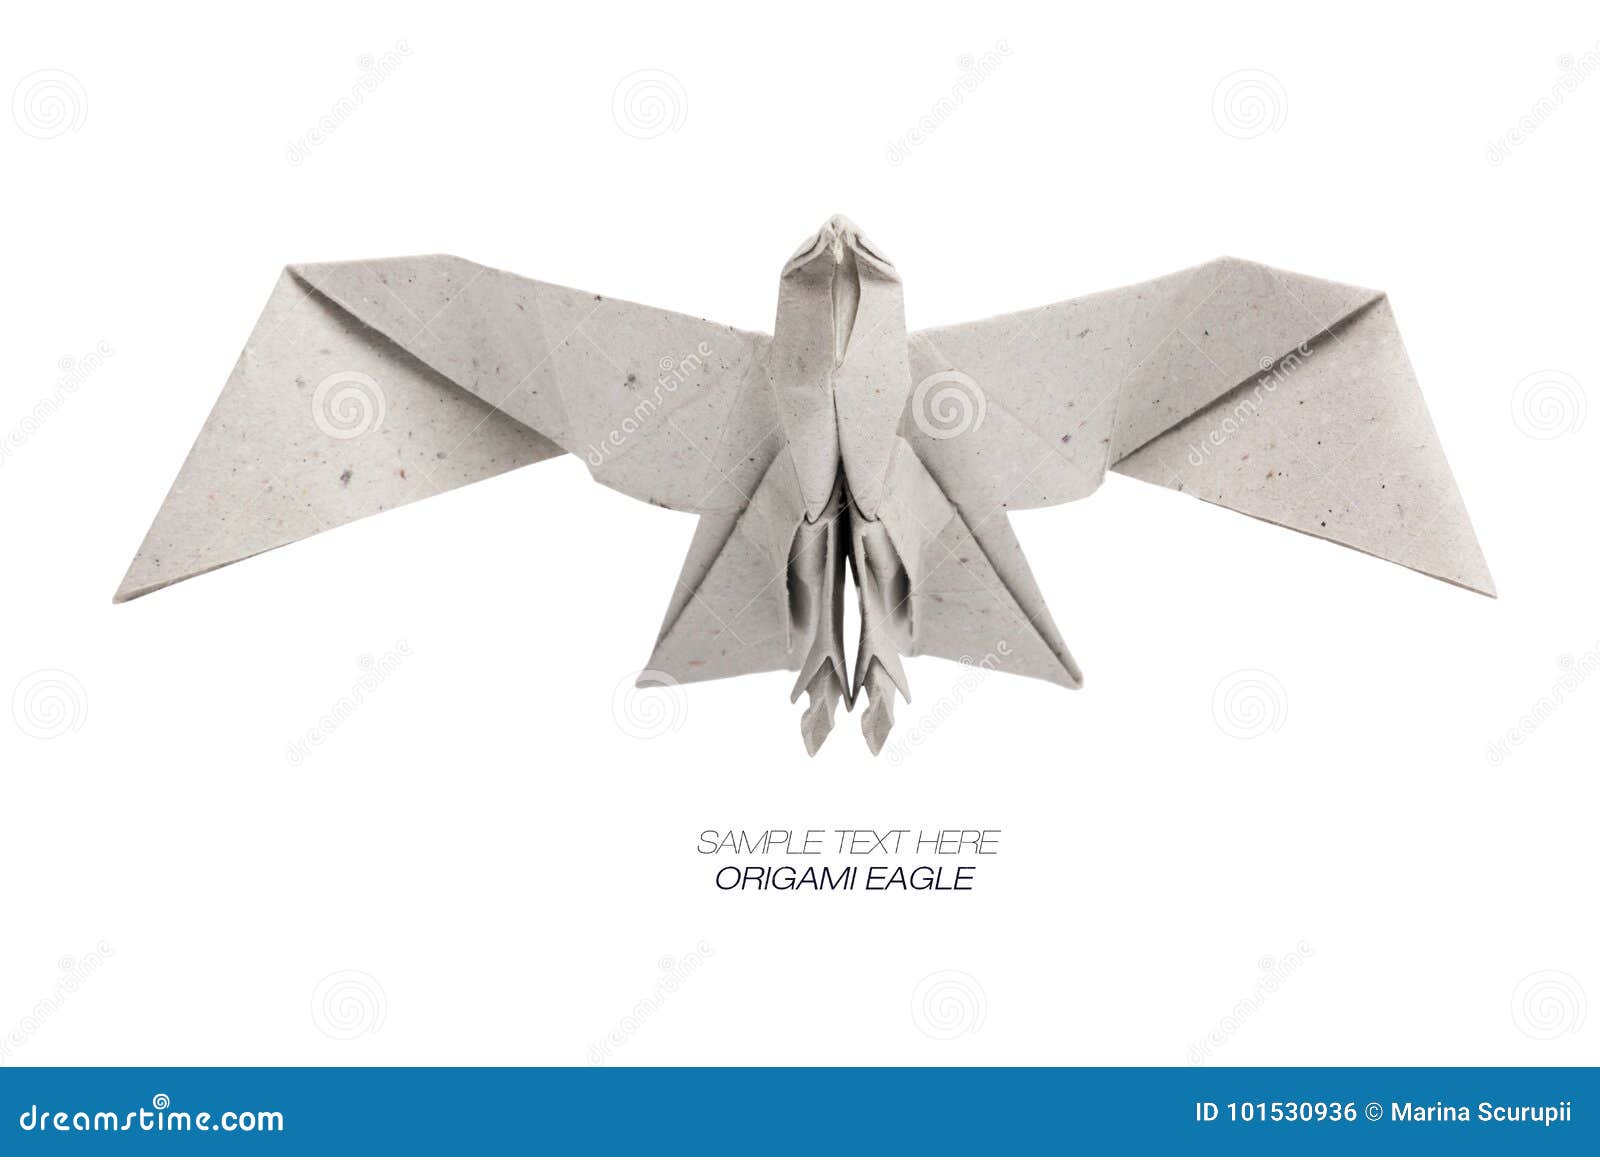 Origami Eagle of Craft Paper Stock Photo - Image of nature, craft: 101530936